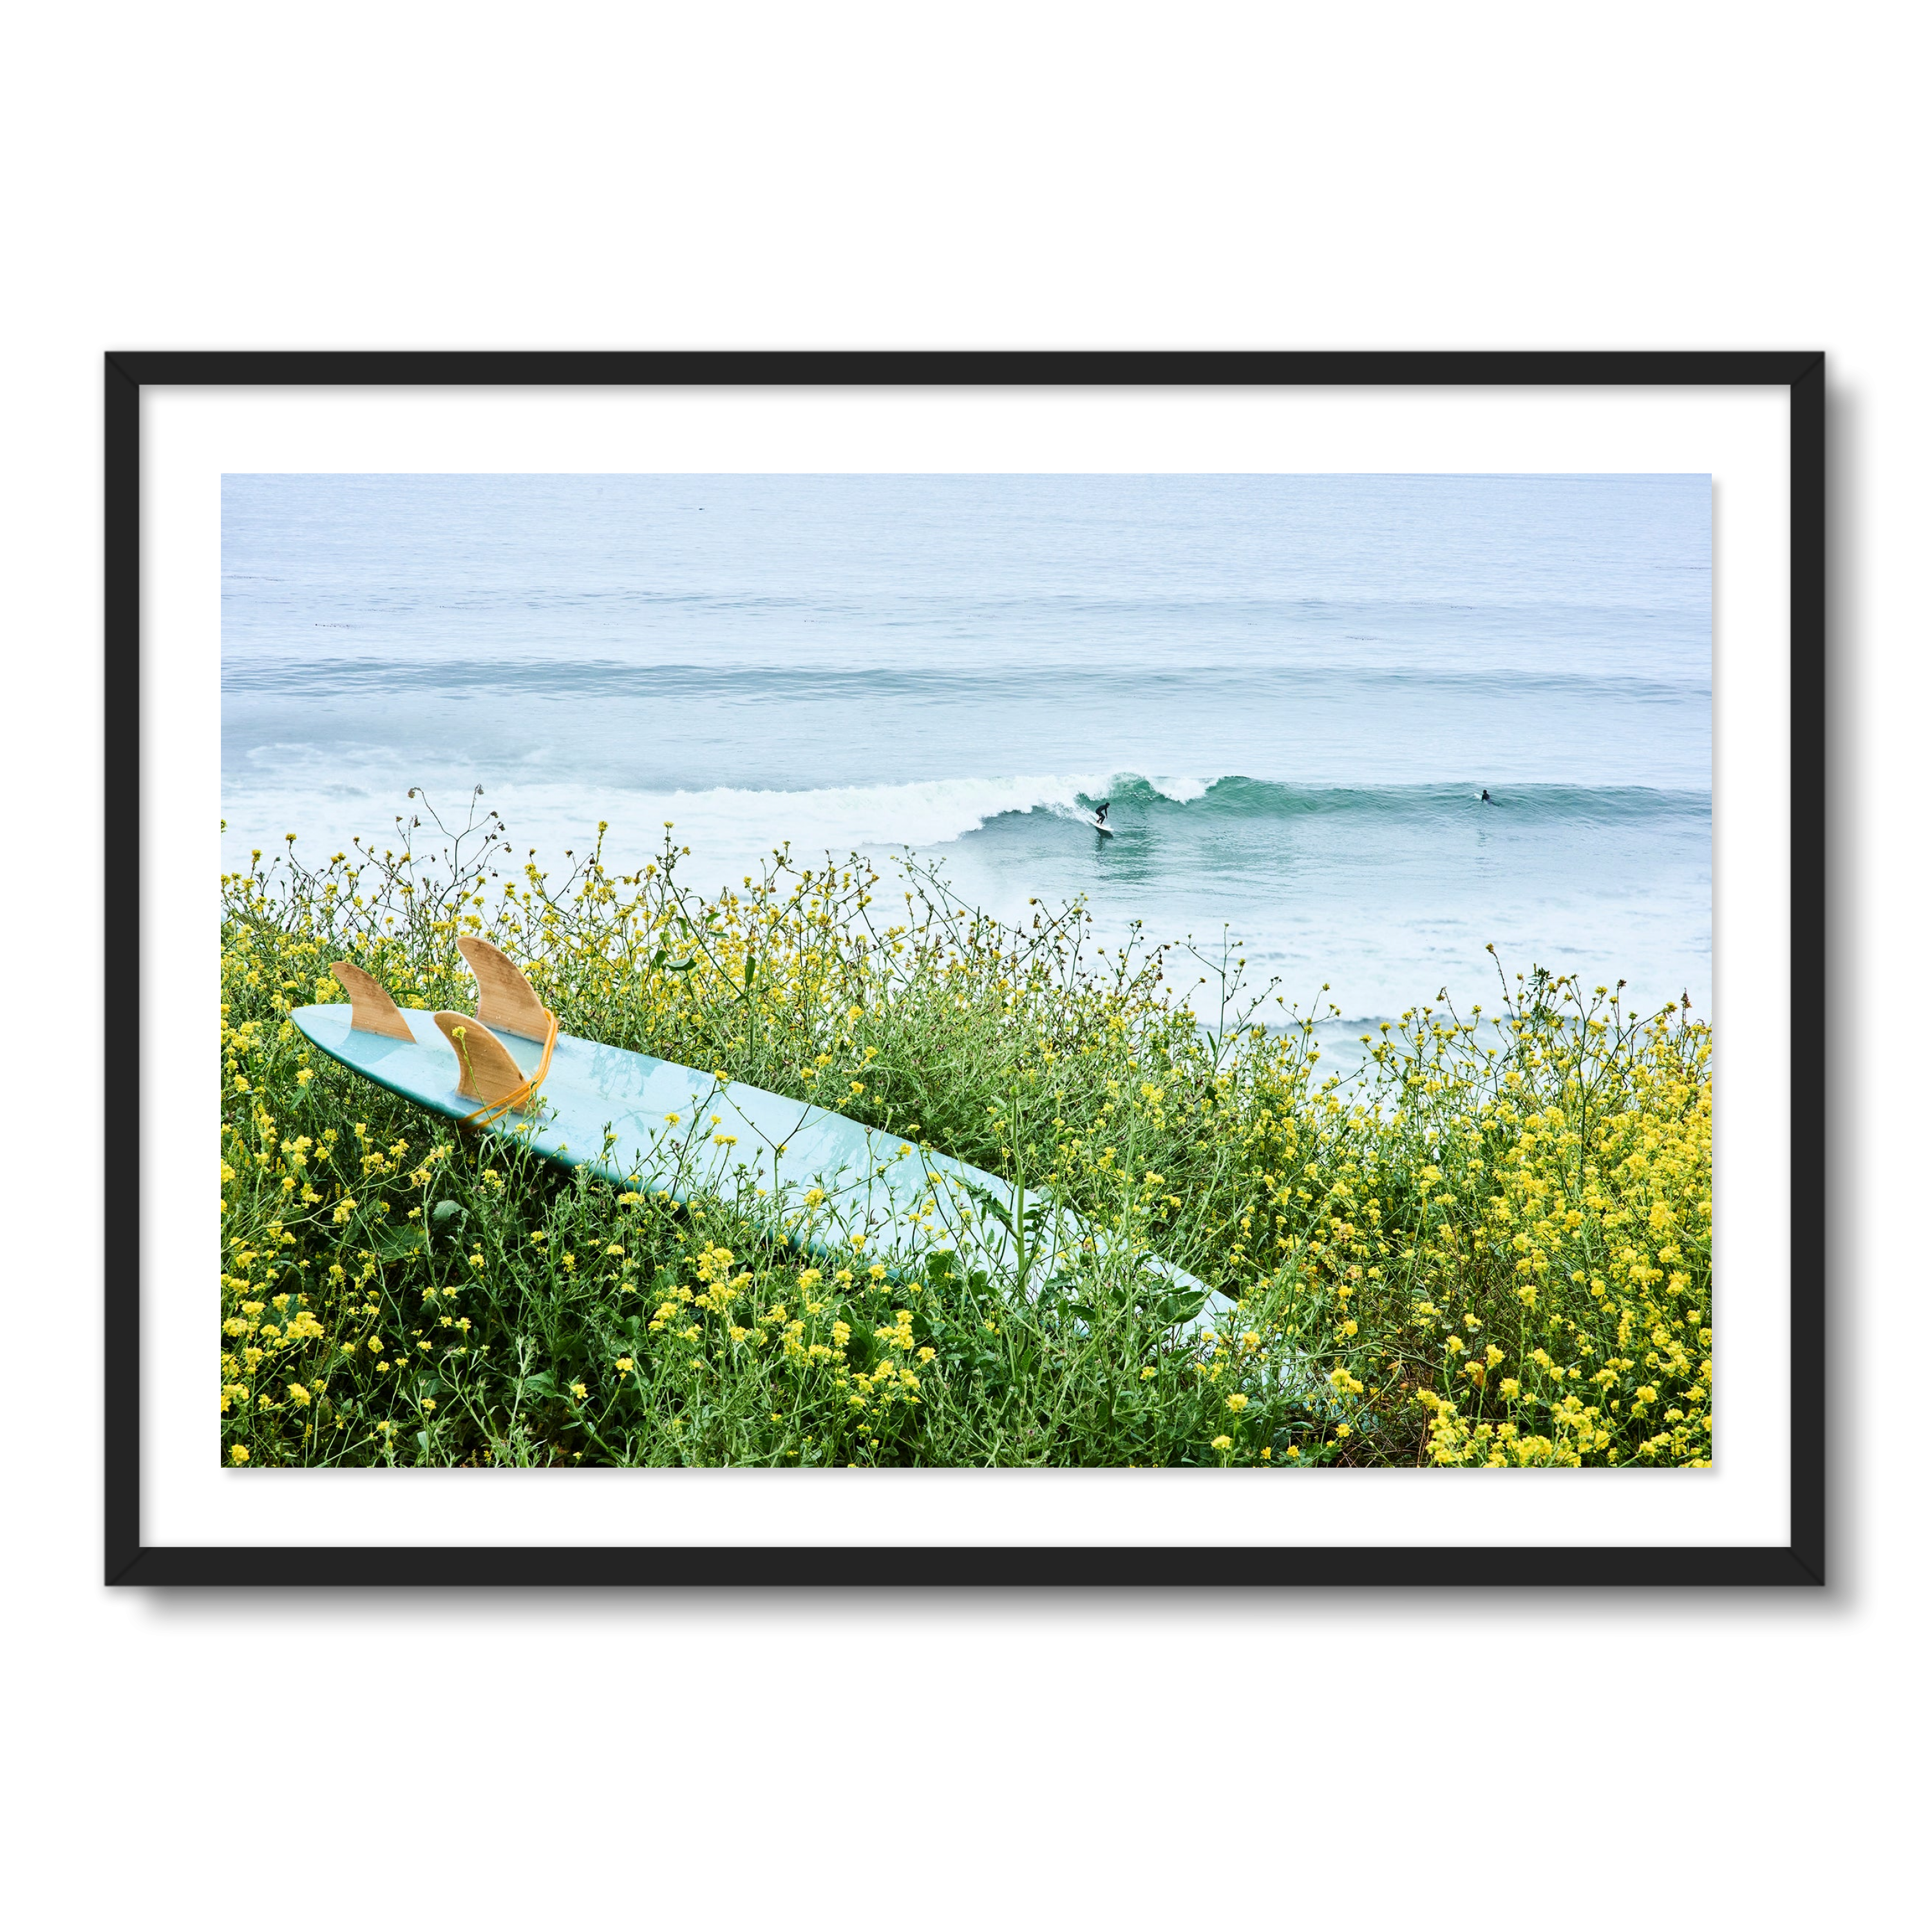 Just Perfect | Framed Wall Art by Mark Squires | Idyll